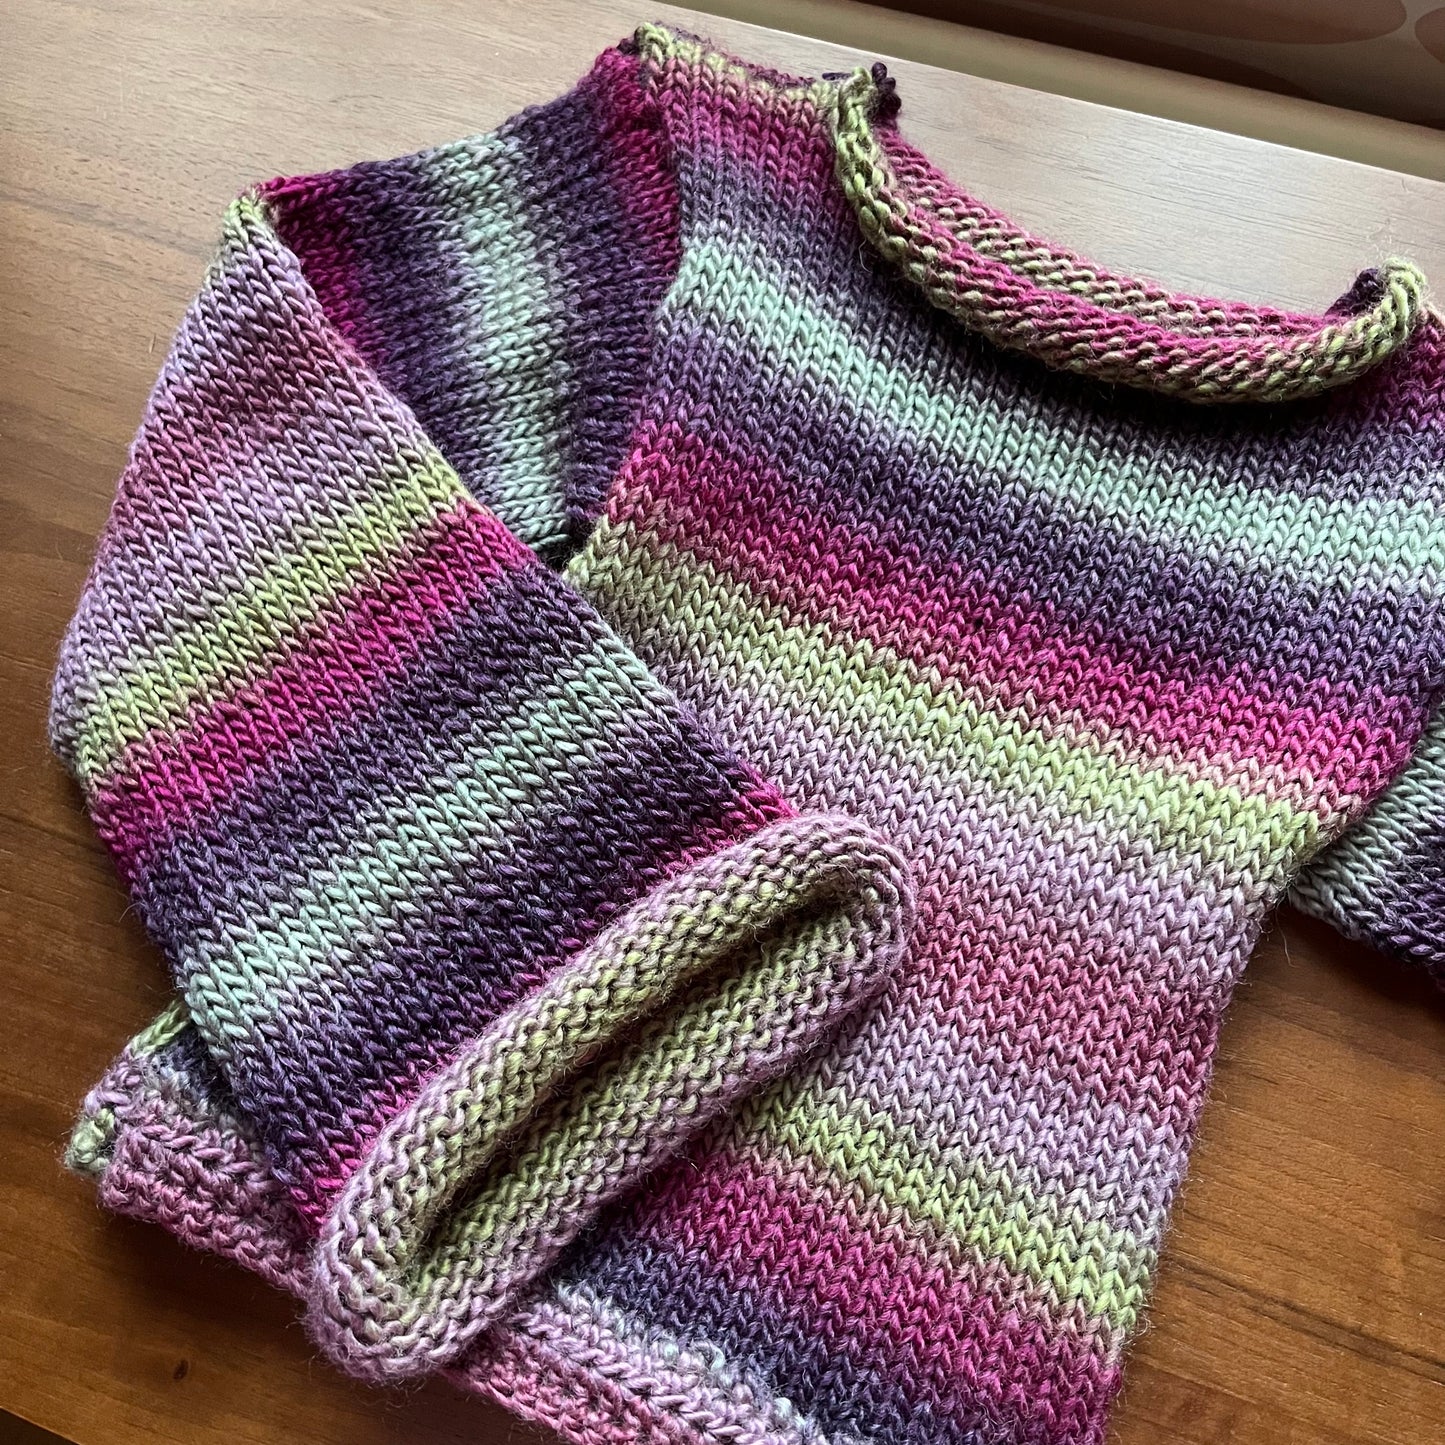 Handmade ombré knitted flared sleeve jumper in green and purple shades